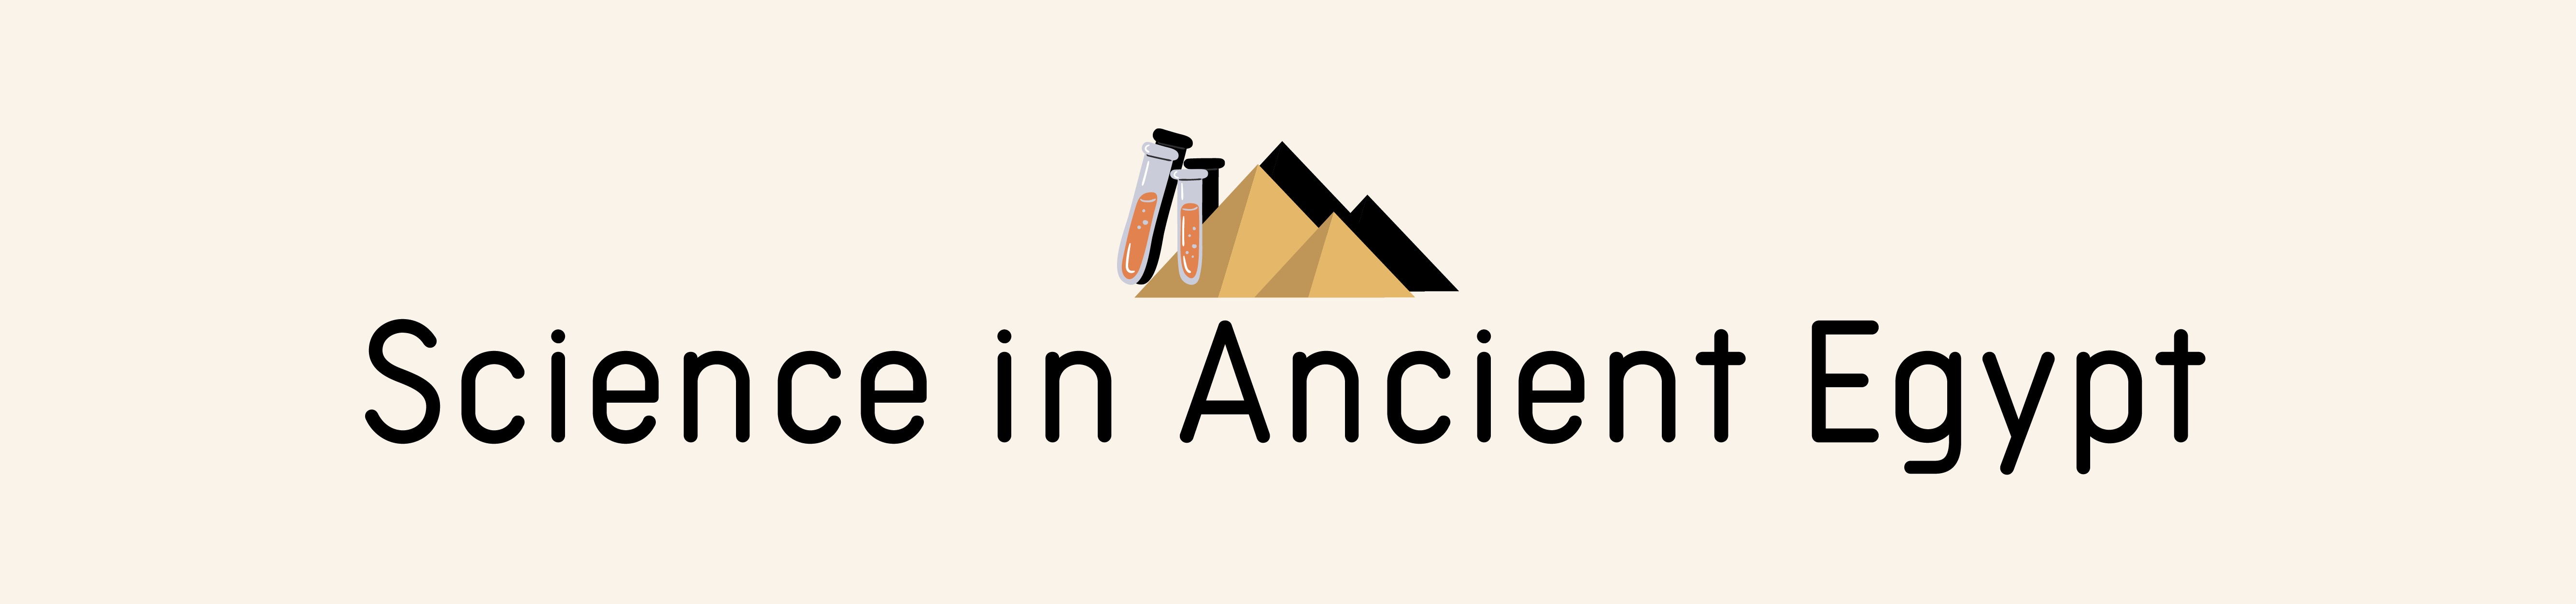 Science in Ancient Egypt header